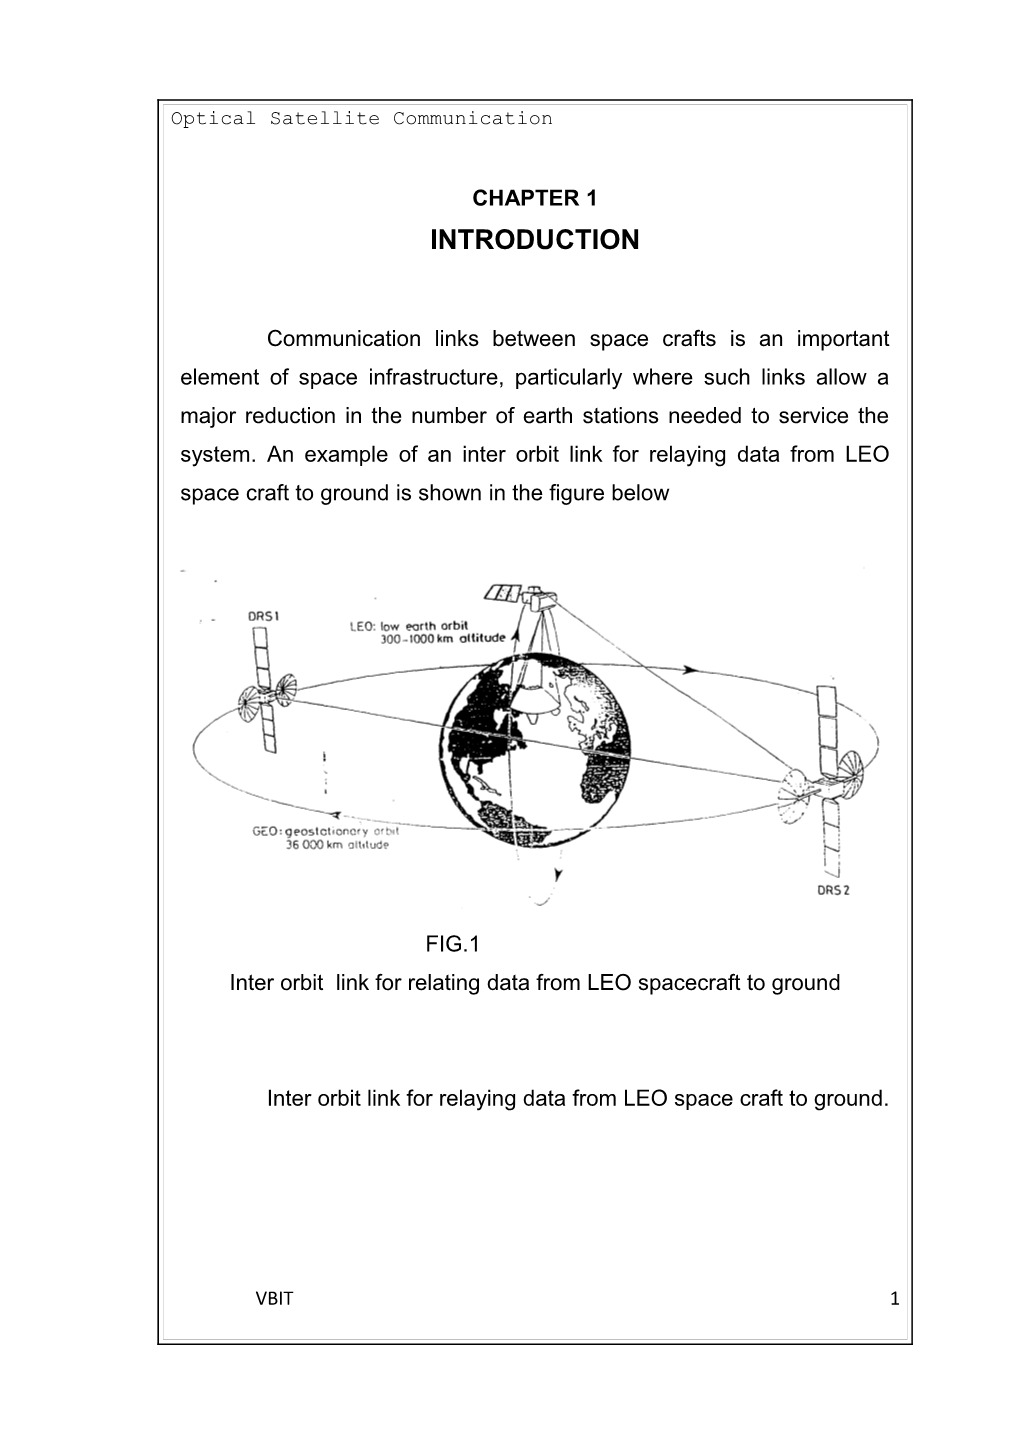 Inter Orbit Link for Relating Data from LEO Spacecraft to Ground